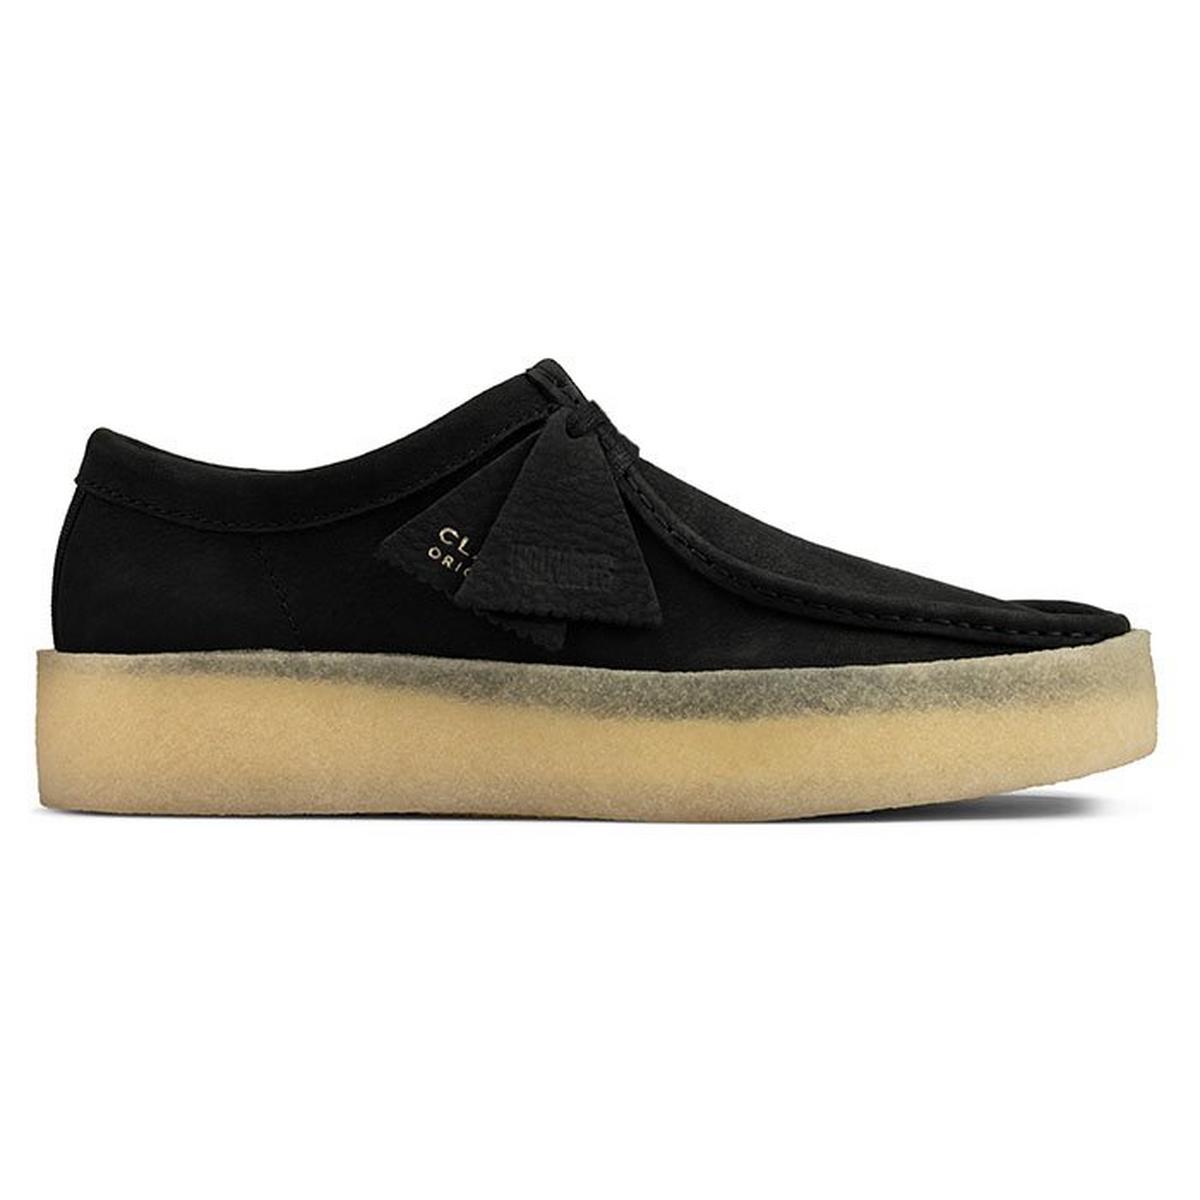 Chaussures Wallabee Cup pour hommes